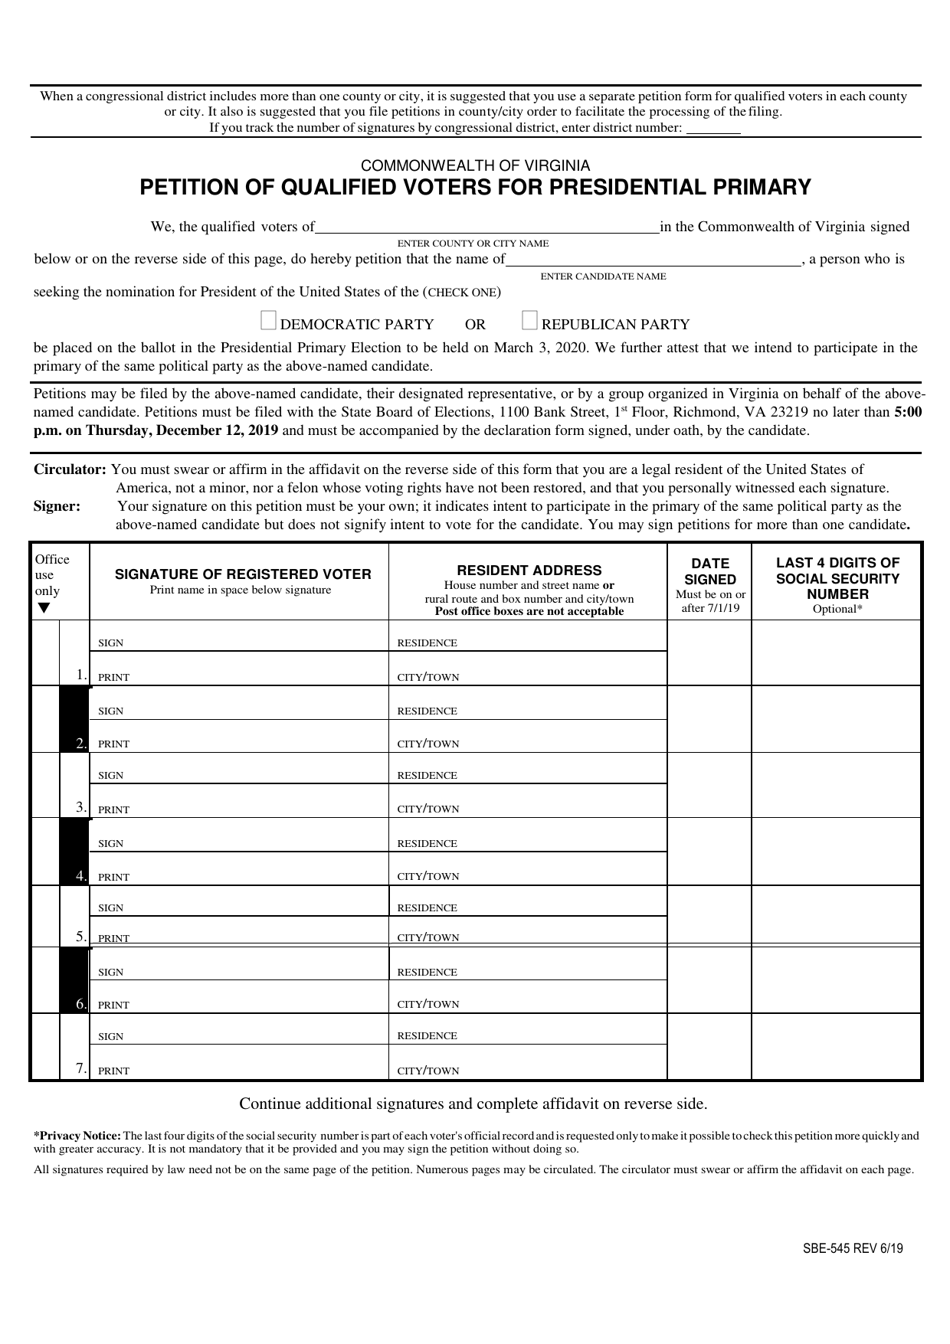 Form SBE-545 Petition of Qualified Voters for Presidential Primary - Virginia, Page 1